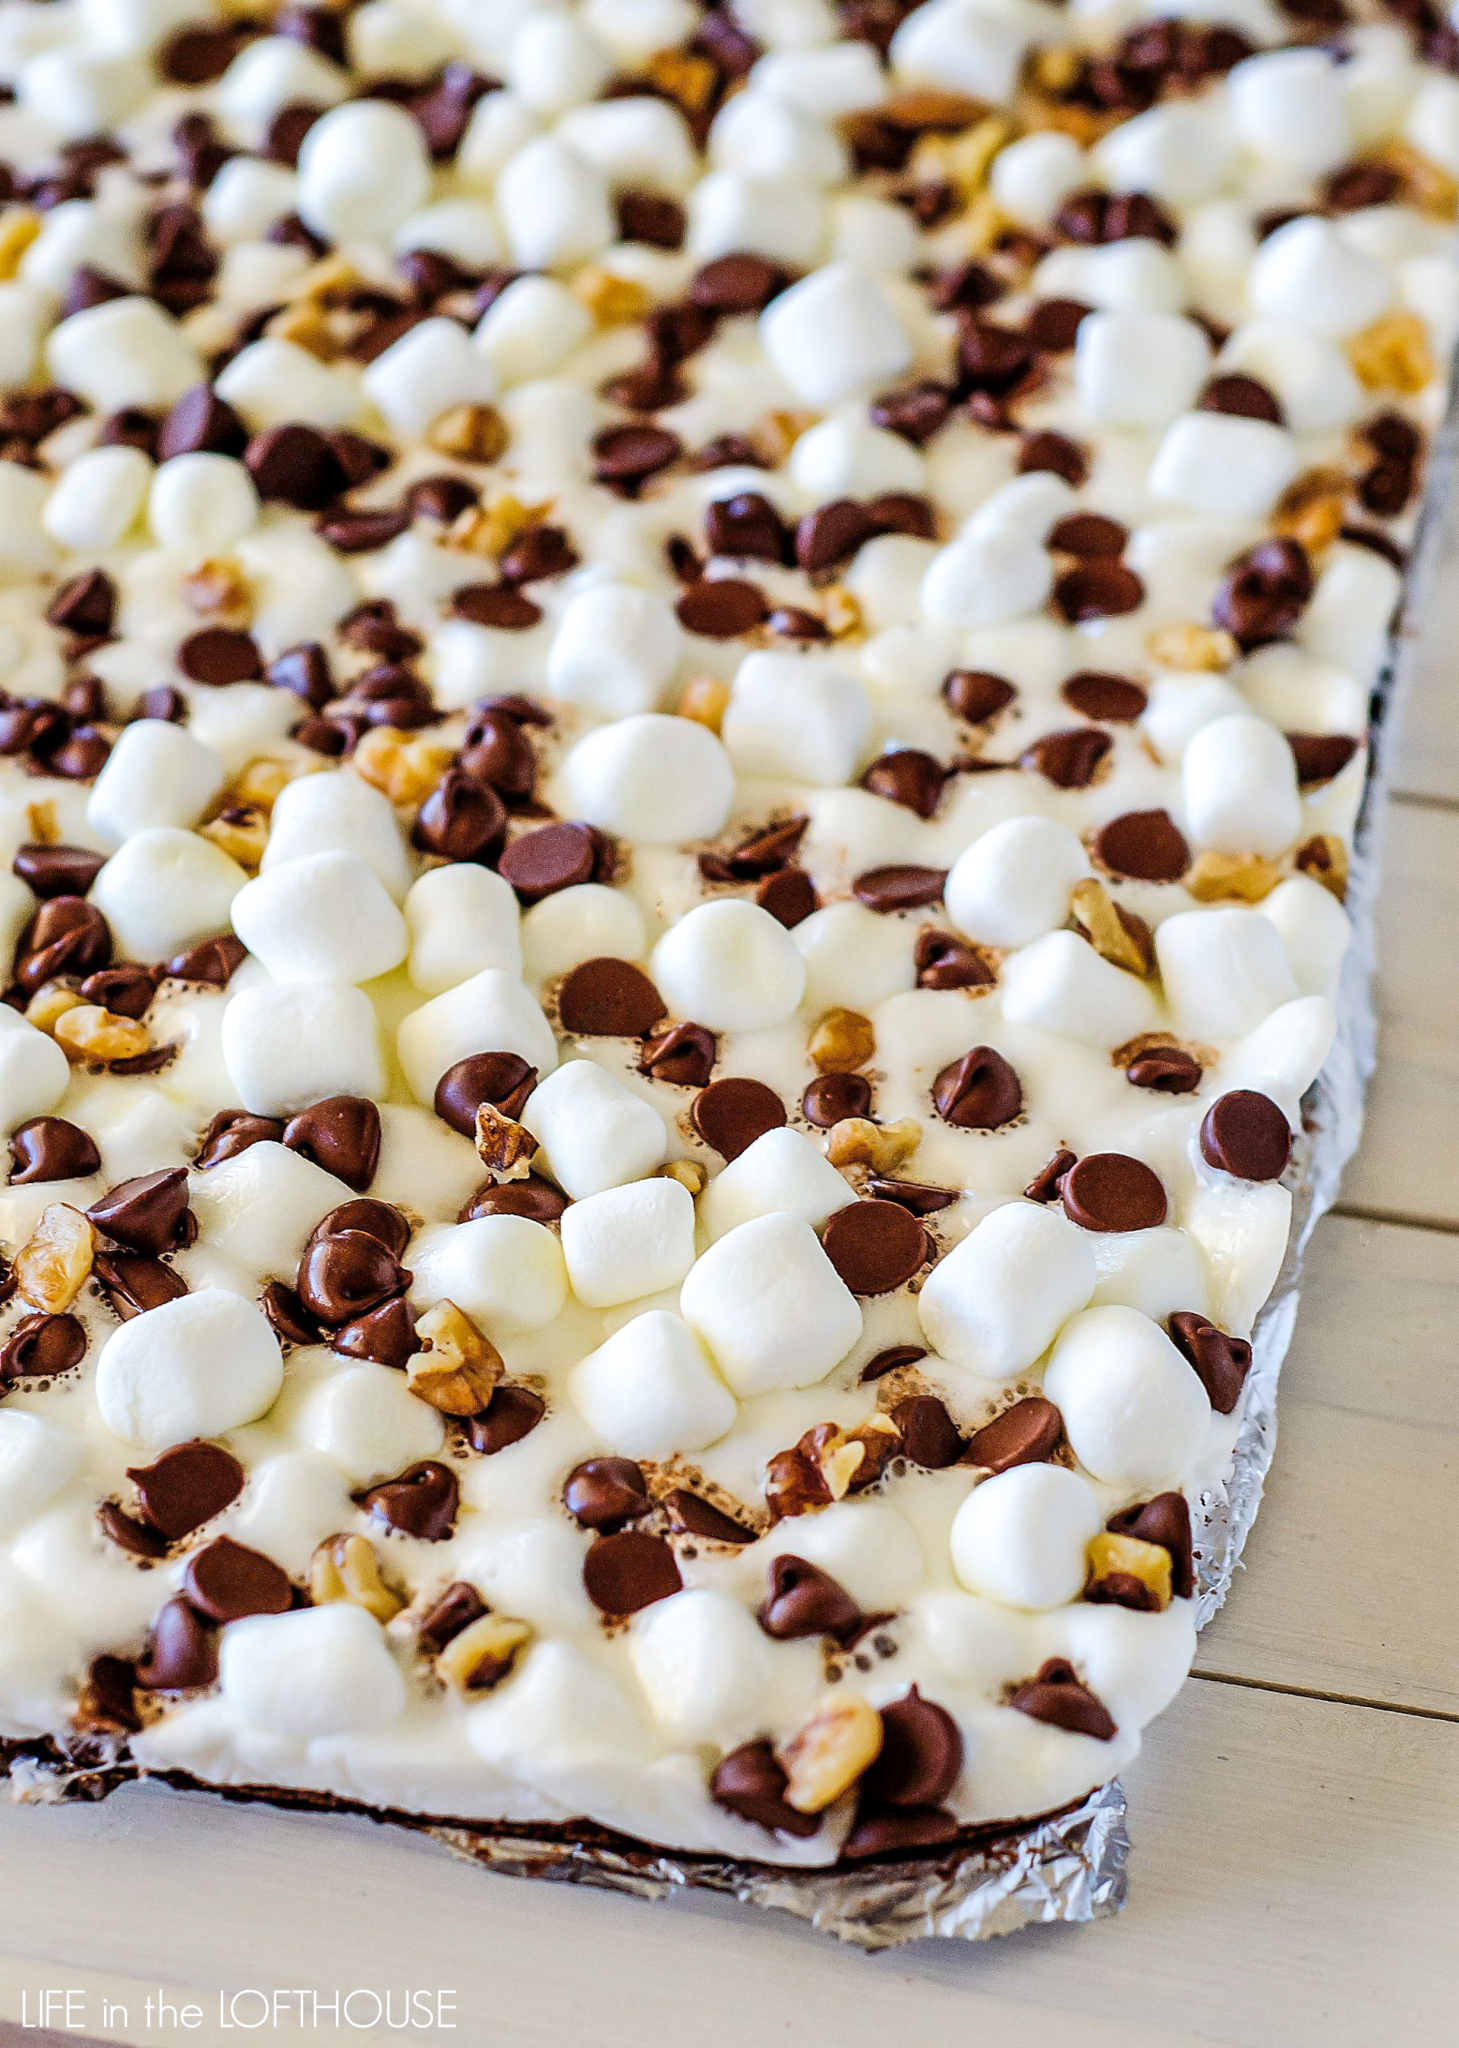 Rocky road brownies are soft and delicious brownies covered in mini marshmallows, chocolate chips and chopped walnuts. Life-in-the-Lofthouse.com